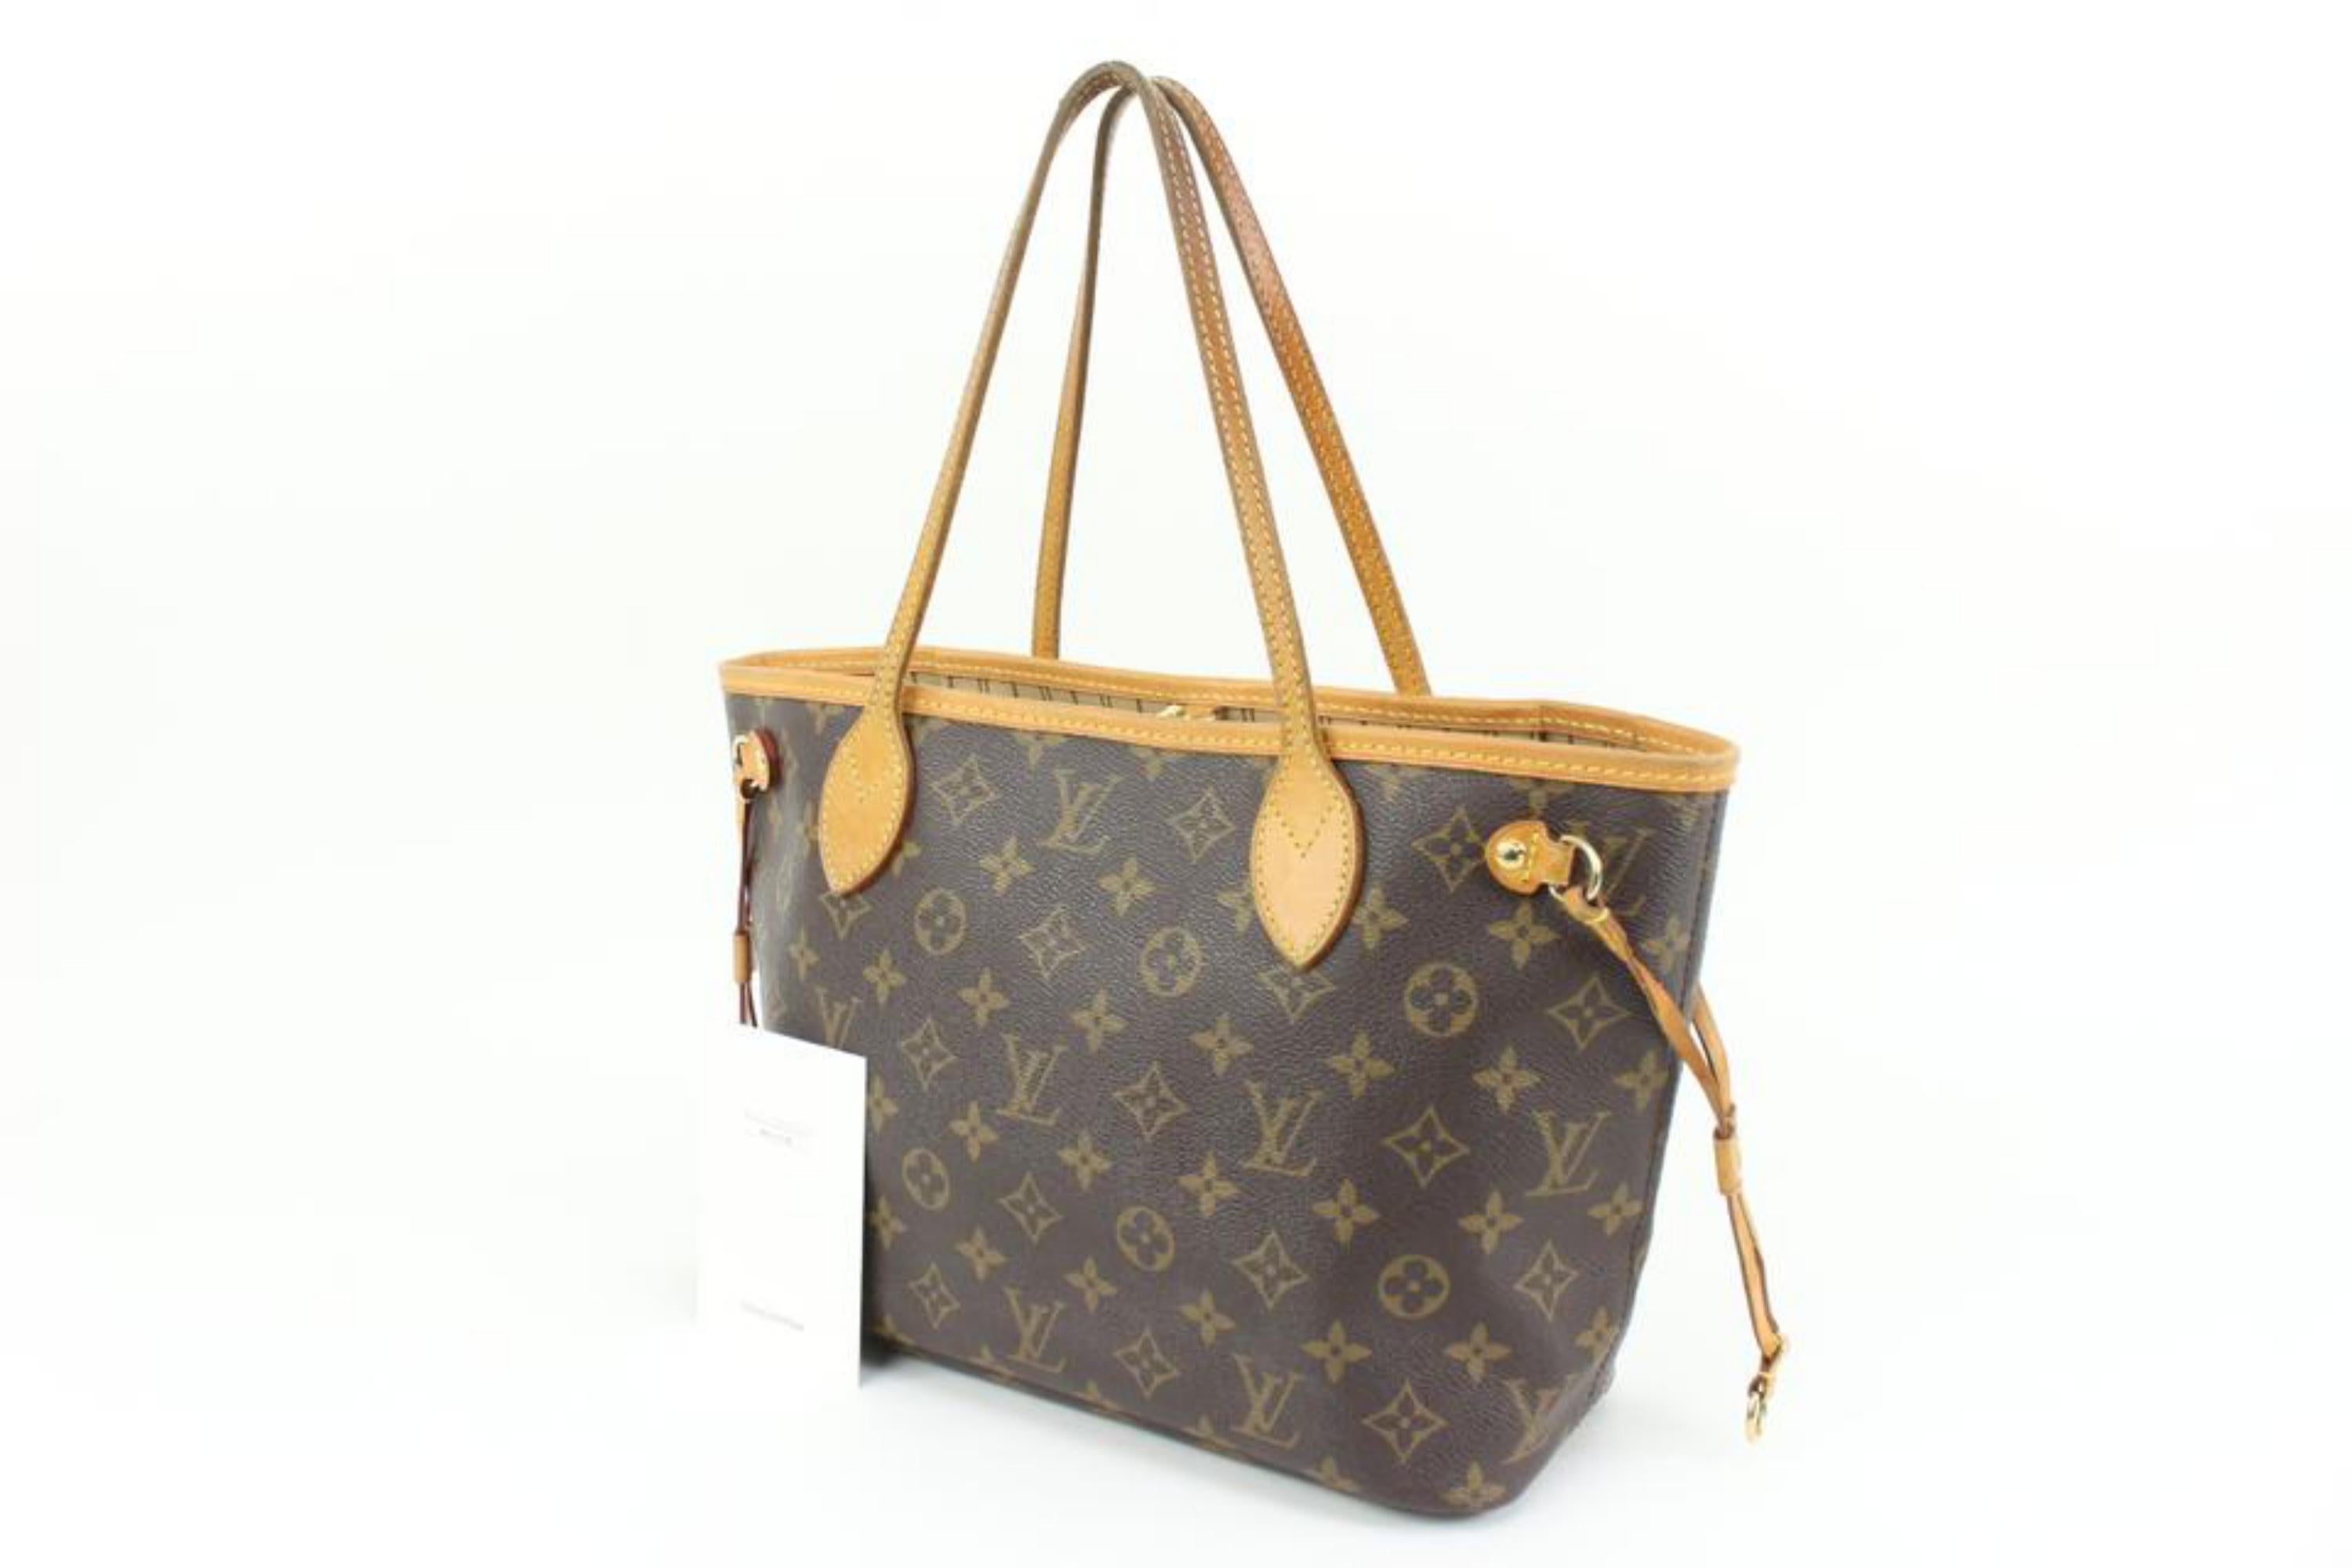 Louis Vuitton Small Monogram Neverfull PM Tote bag 11lk323s
Date Code/Serial Number: VI3007
Made In: France
Measurements: Length:  15